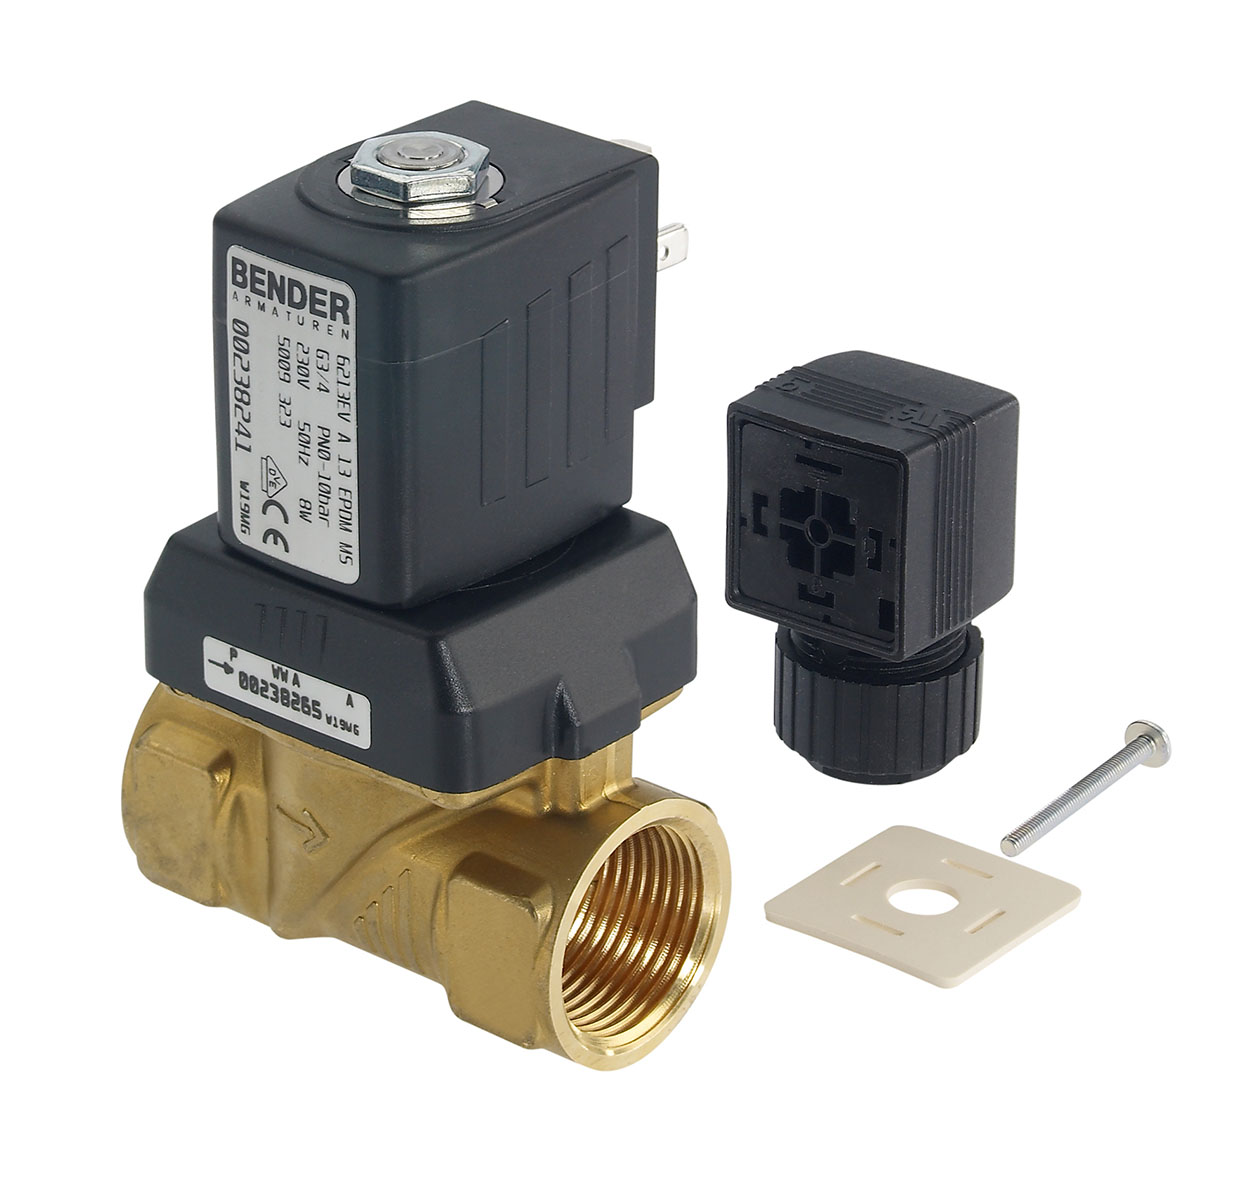 5009334 - 2/2 way solenoidvalve normally closed for fluids Type 1; female thread